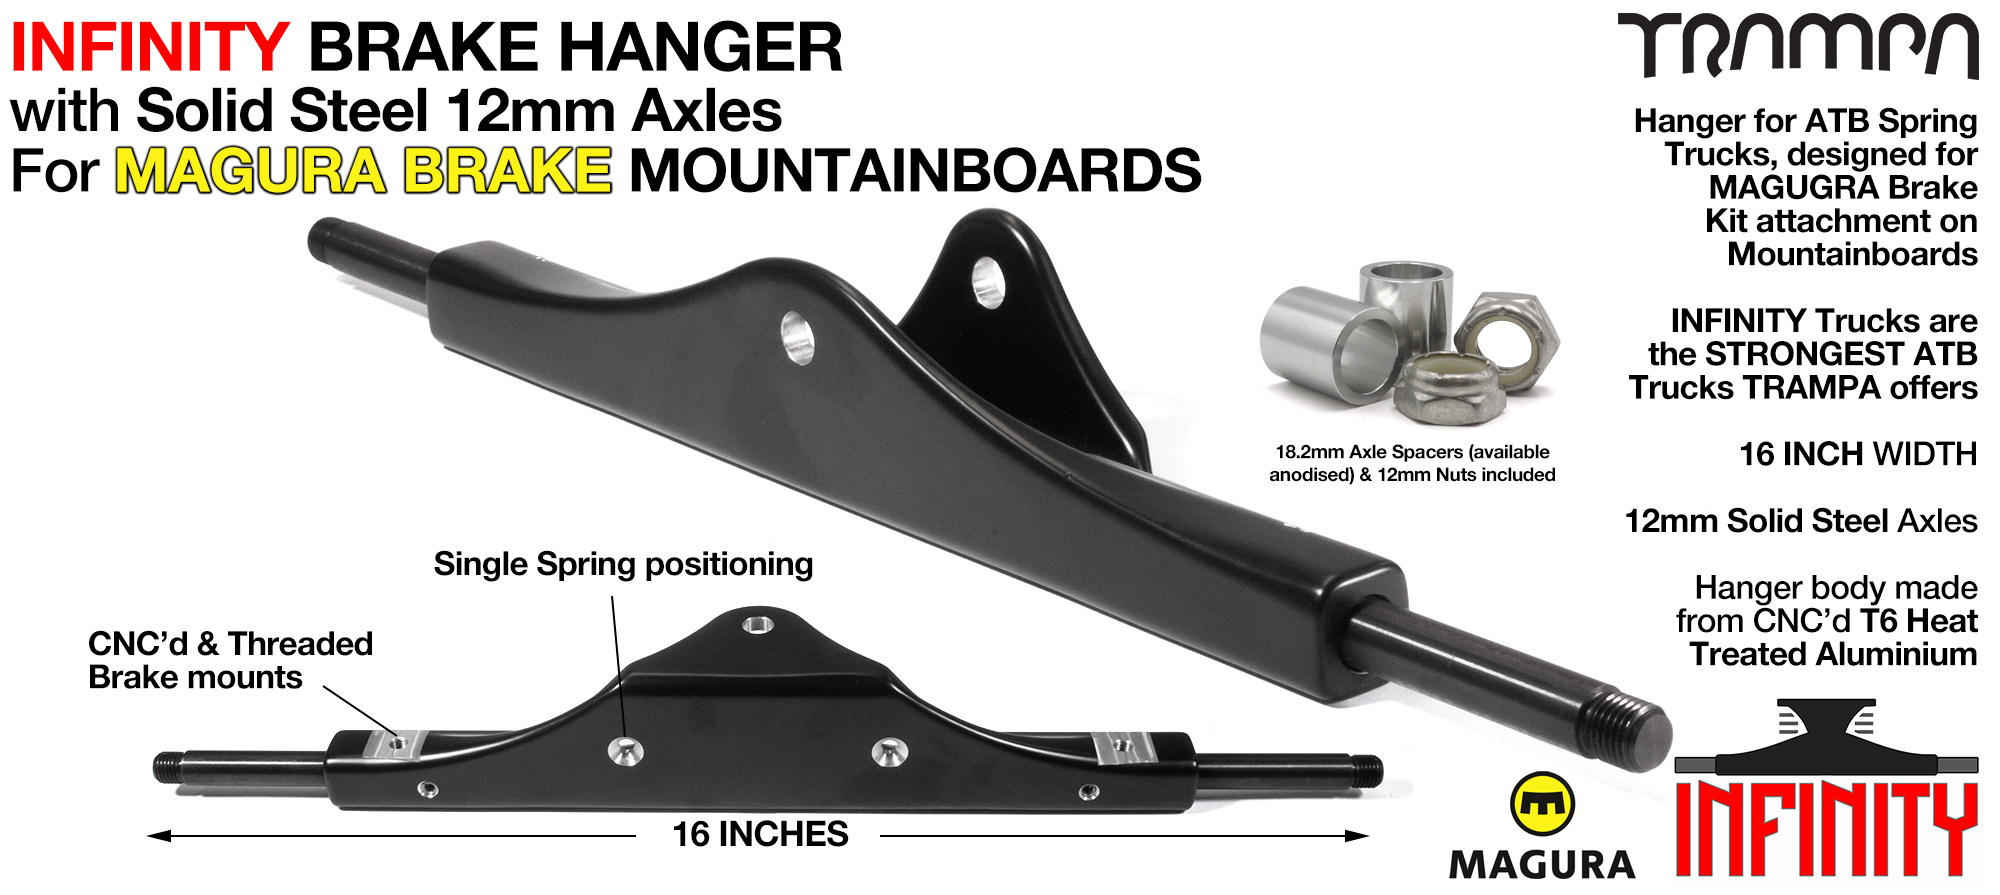 INFINITY Brake Hanger - 12mm SOLID Axles modifed to fit MAGURA Hydraulic brakes